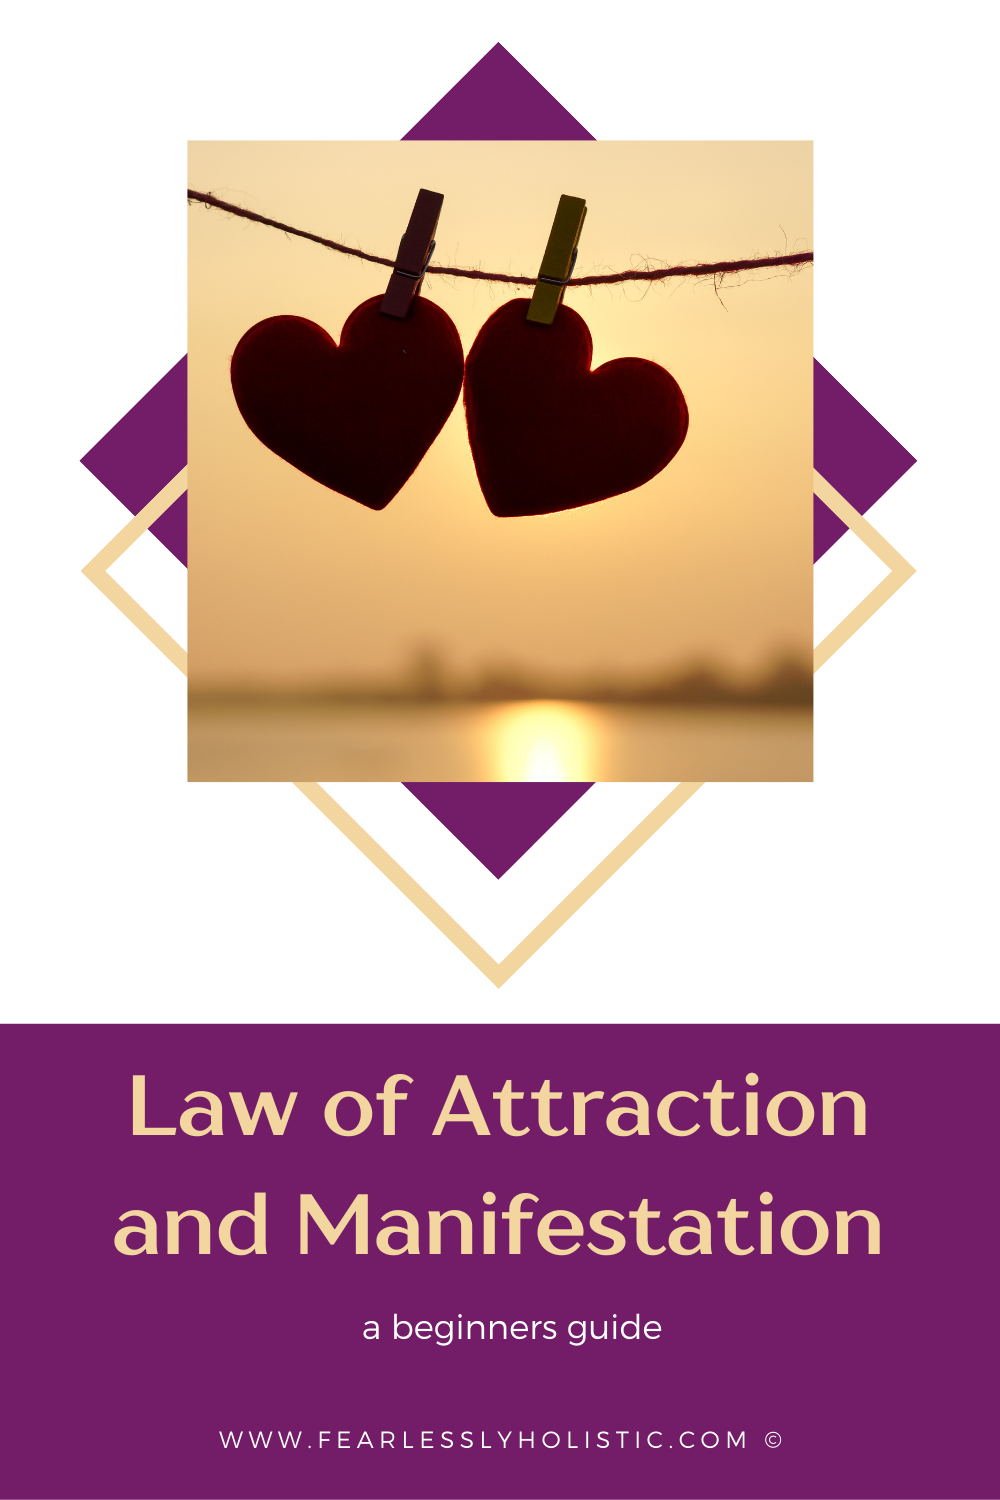 Law of Attraction and Manifestation Explained